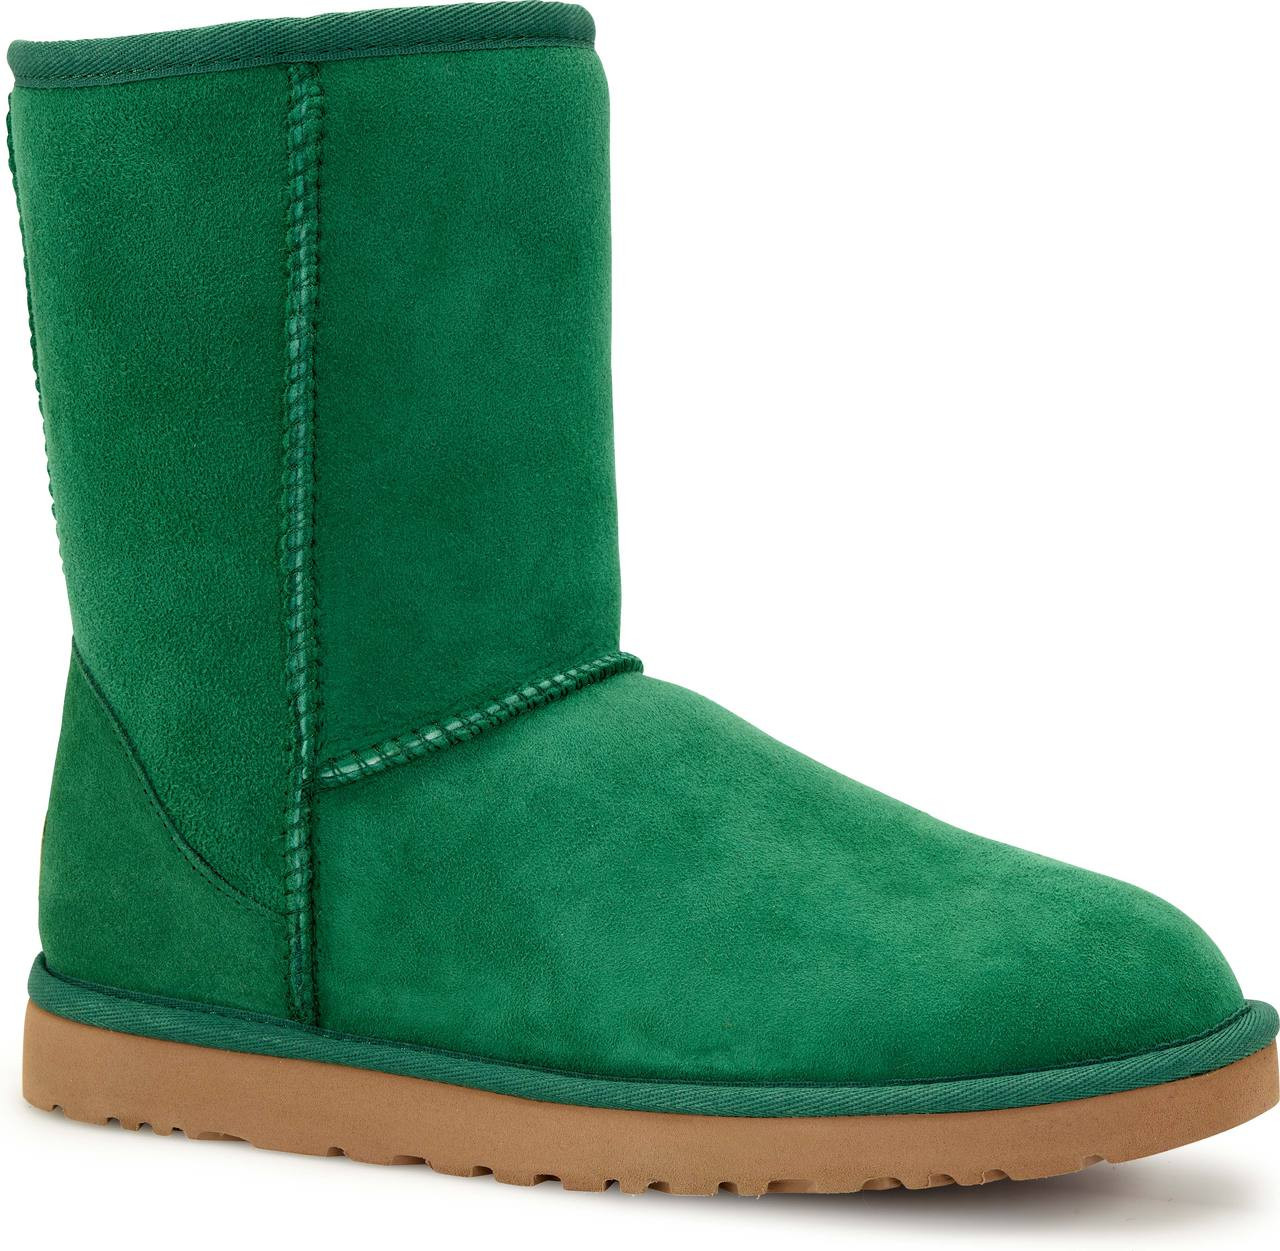 green ugg boots on sale off 64% - www 